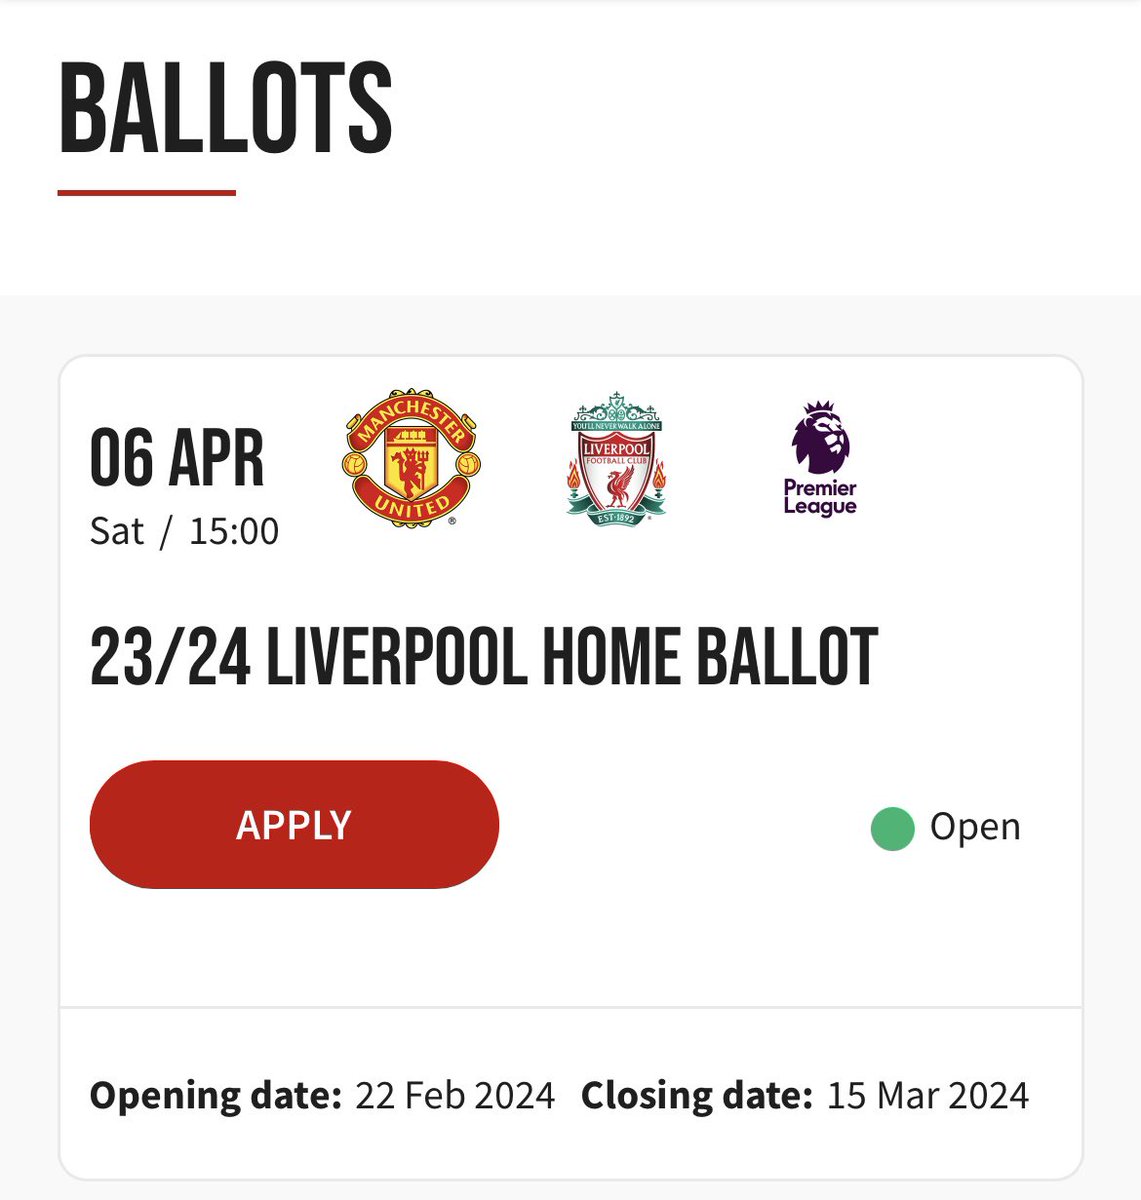 Ticket applications are open from today for the Liverpool home ballot! #MUFC